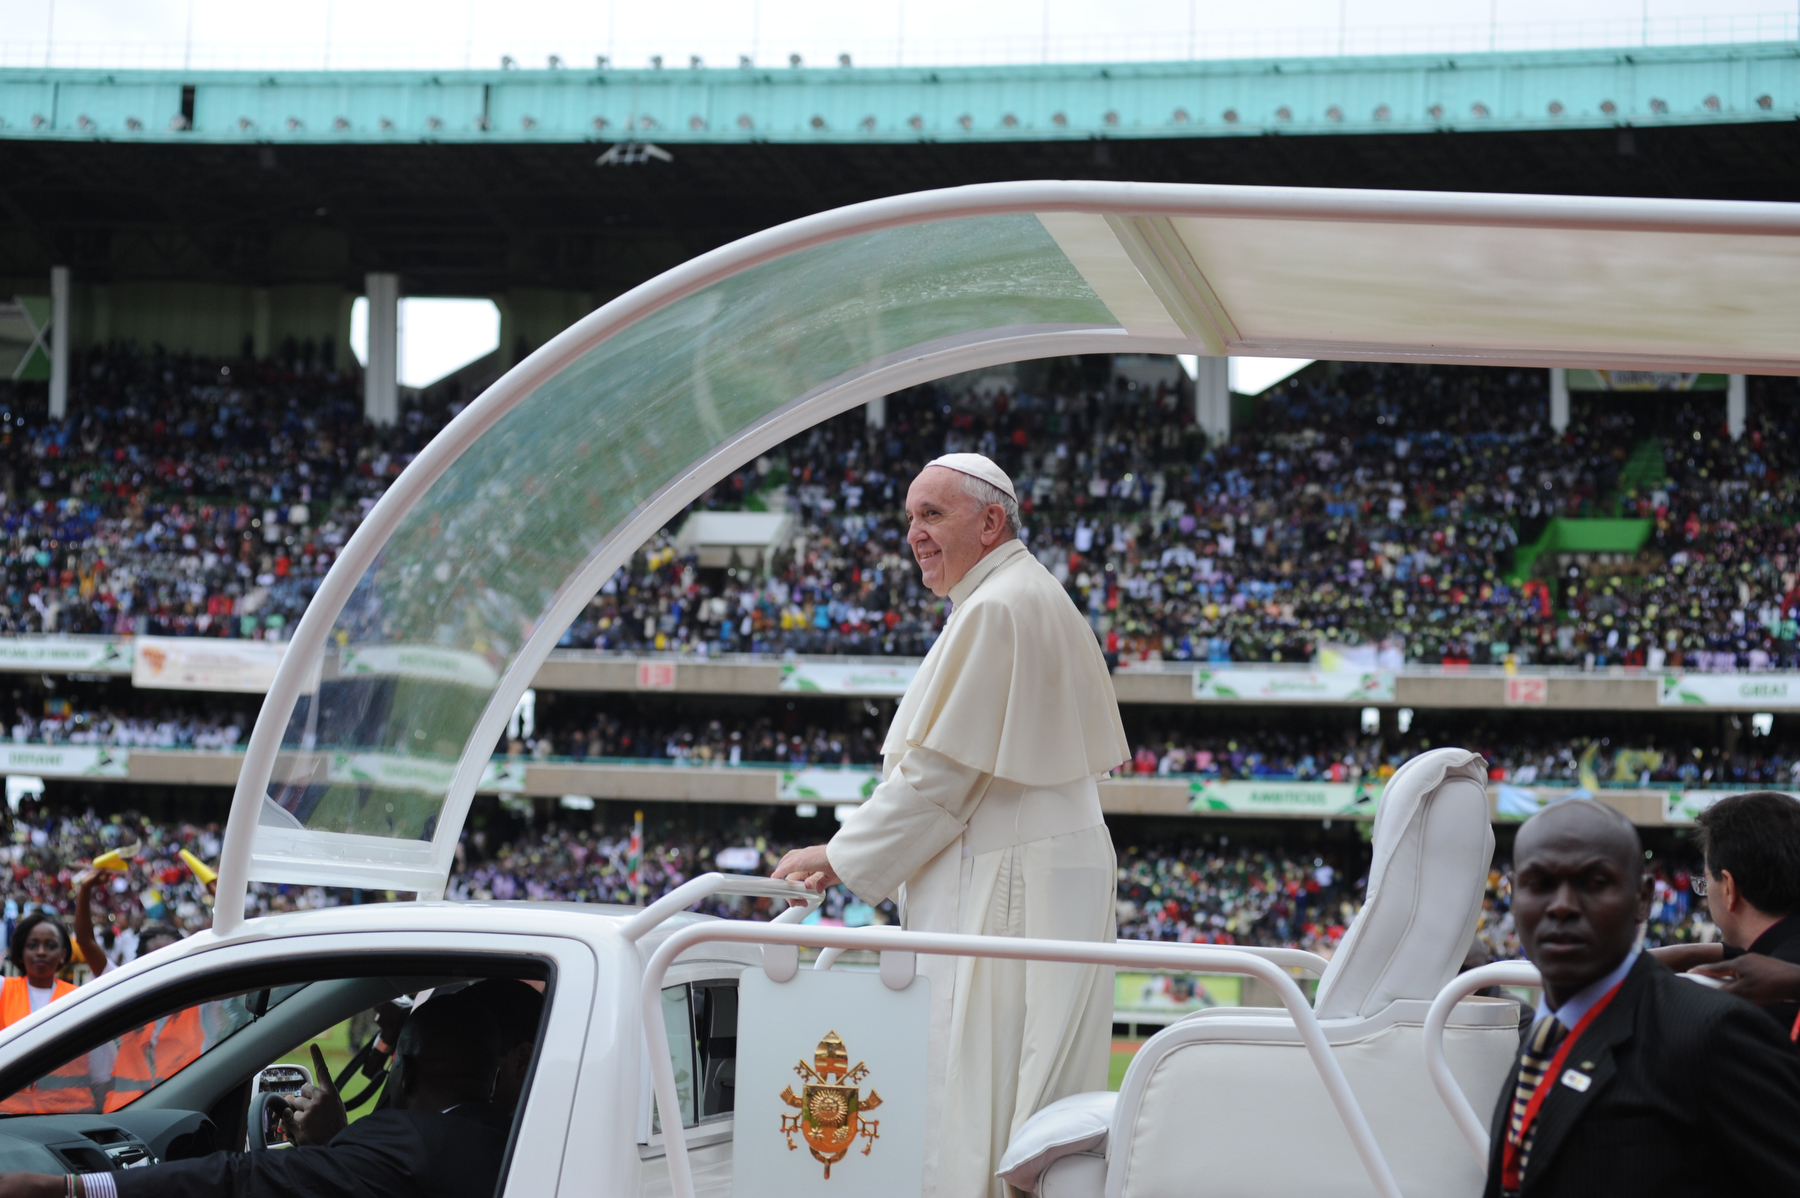  Pope Francis enters Kasarani Stadium to greet East AFrican youth on 27 November 2015. Pope Francis is on a five-day visit to Kenya, Uganda and Central African Republic (CAR). AFP PHOTO/Jennifer Huxta
 